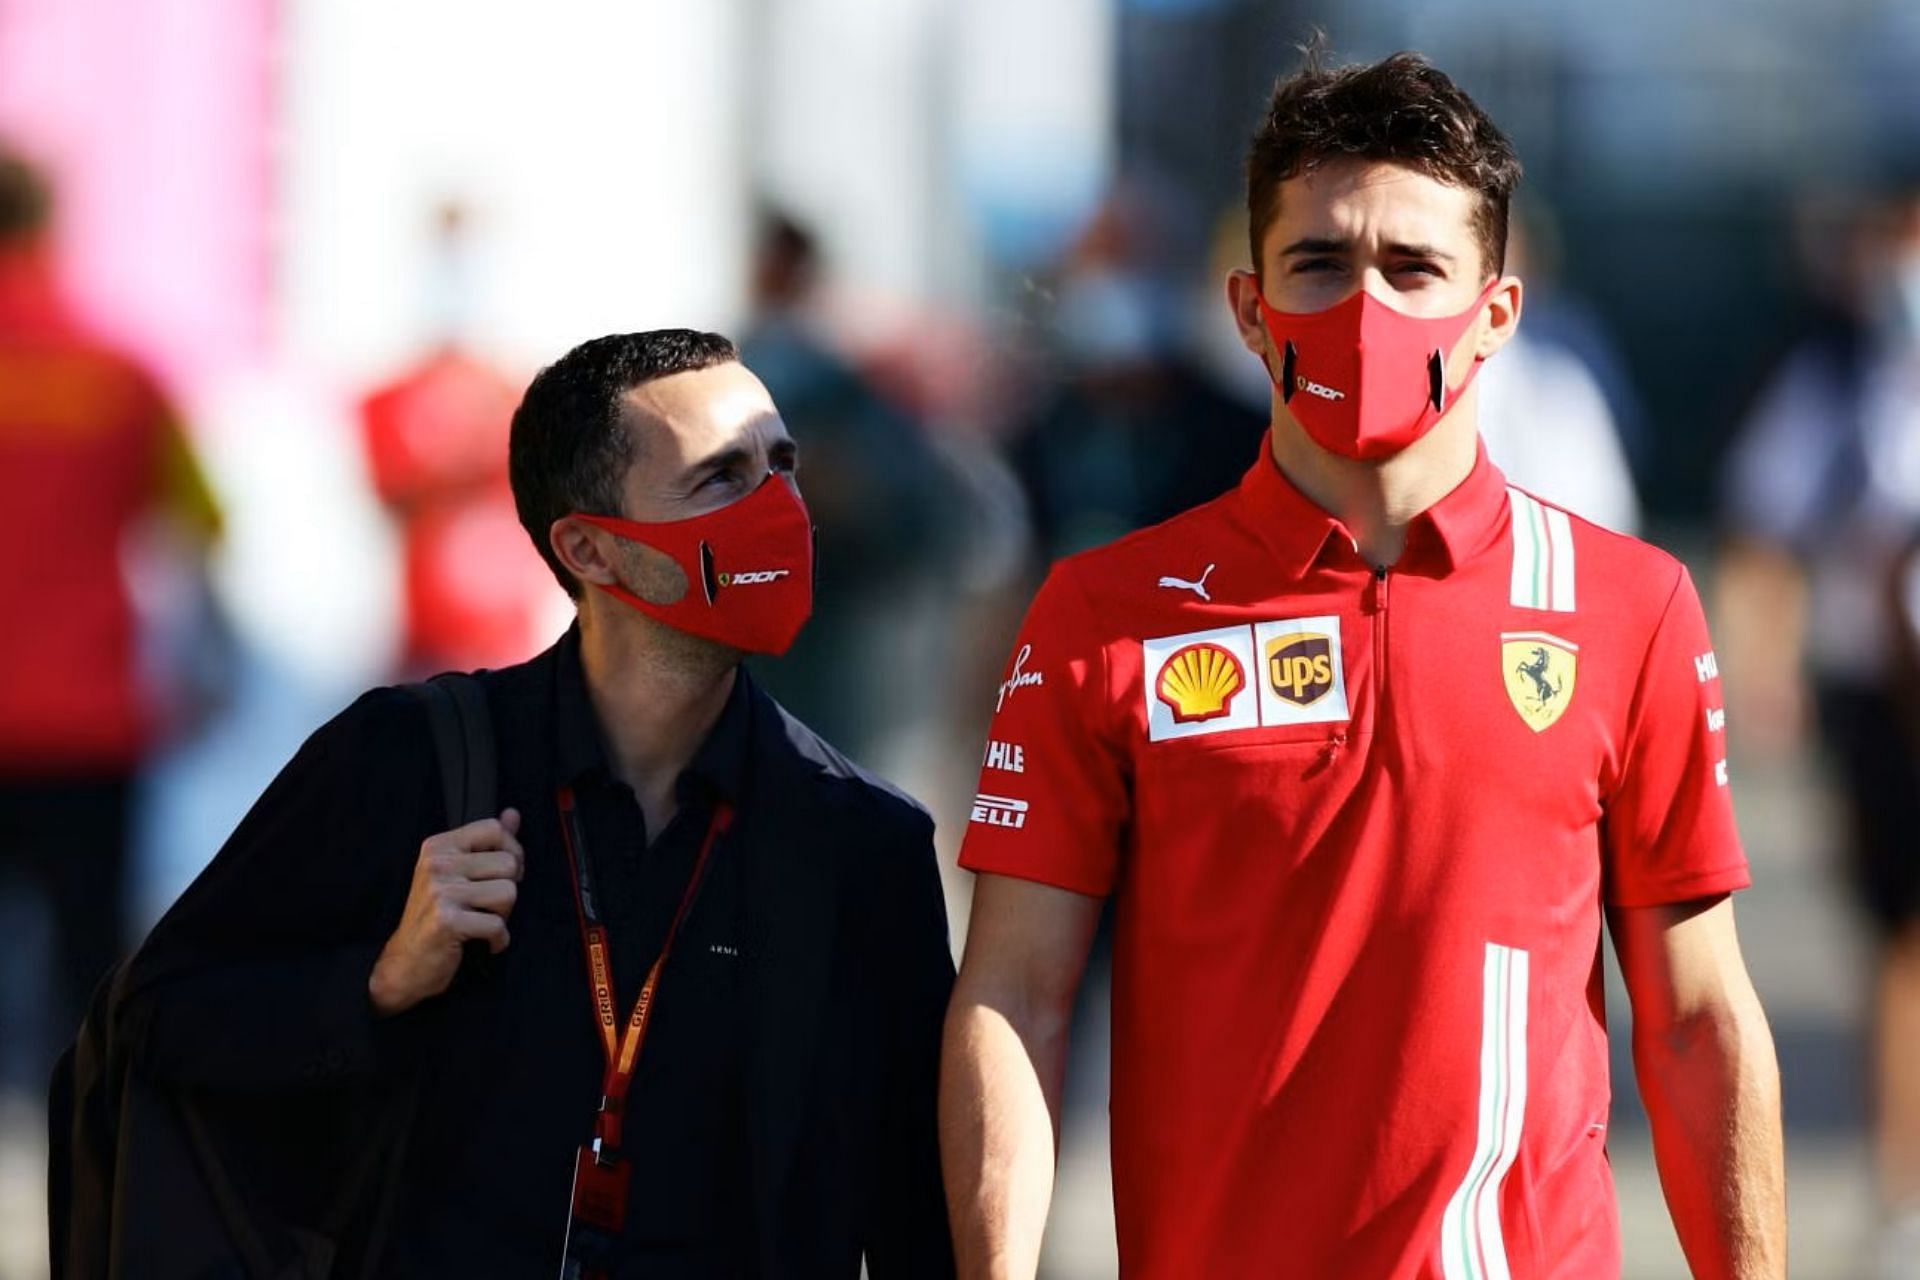 Charles Leclerc walks in the paddock with his manager Nicolas Todt before the 2020 F1 Turkish Grand Prix. (Photo by Peter Fox/Getty Images)